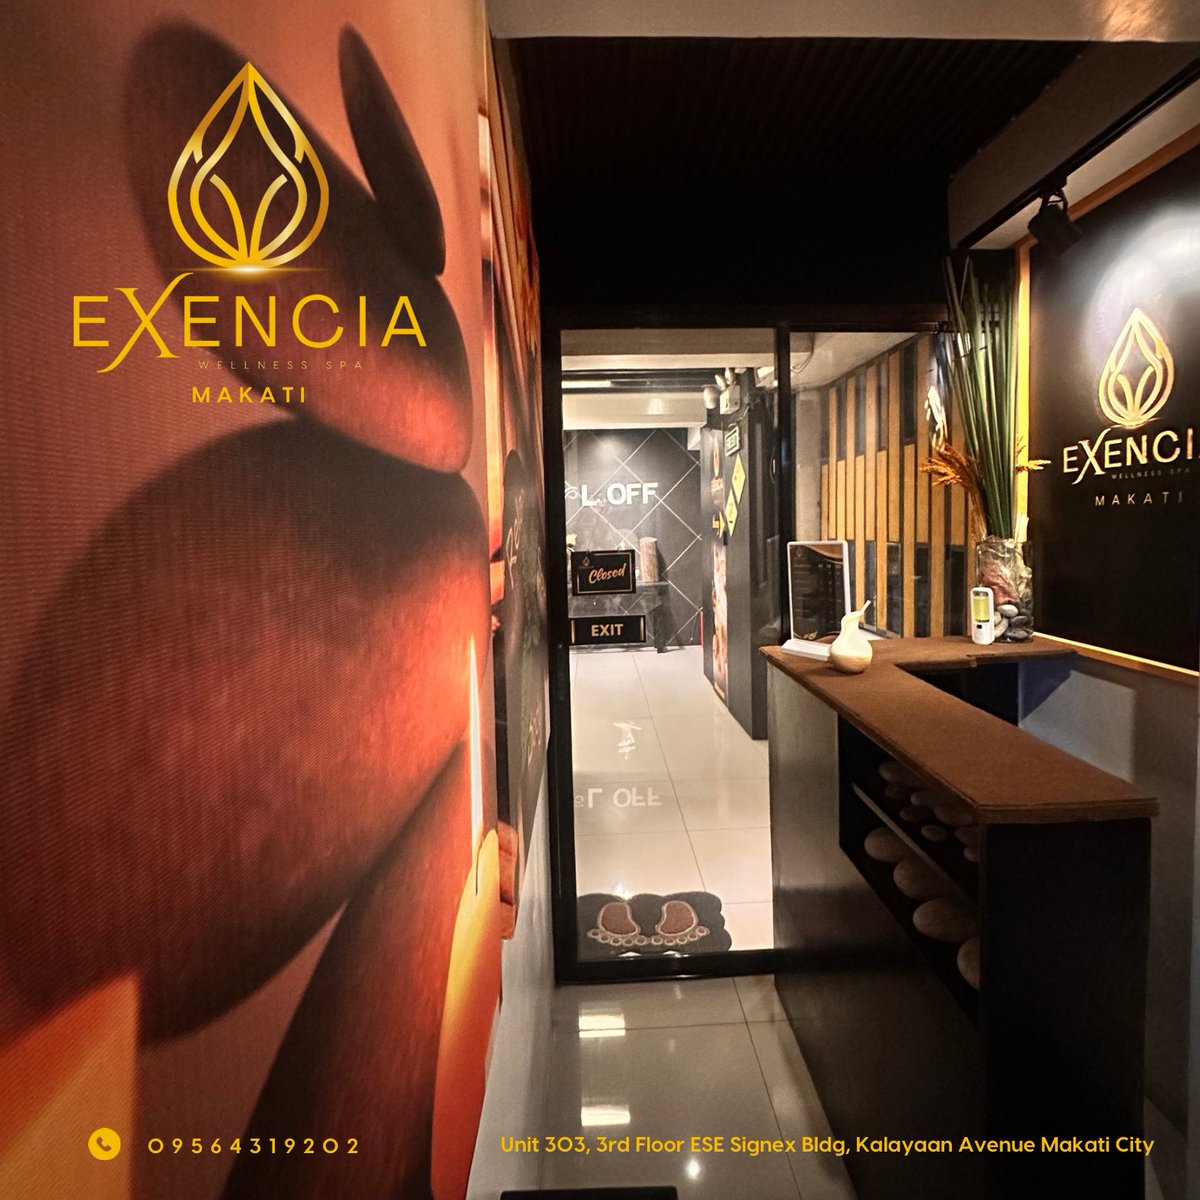 WE ARE NOW OPEN!

Come and visit us today to enjoy 20% Discount in-spa services.

📍 Unit 303, 3rd Floor ESE Signex Bldg, Kalayaan Avenue Makati city 
📞 09564319202